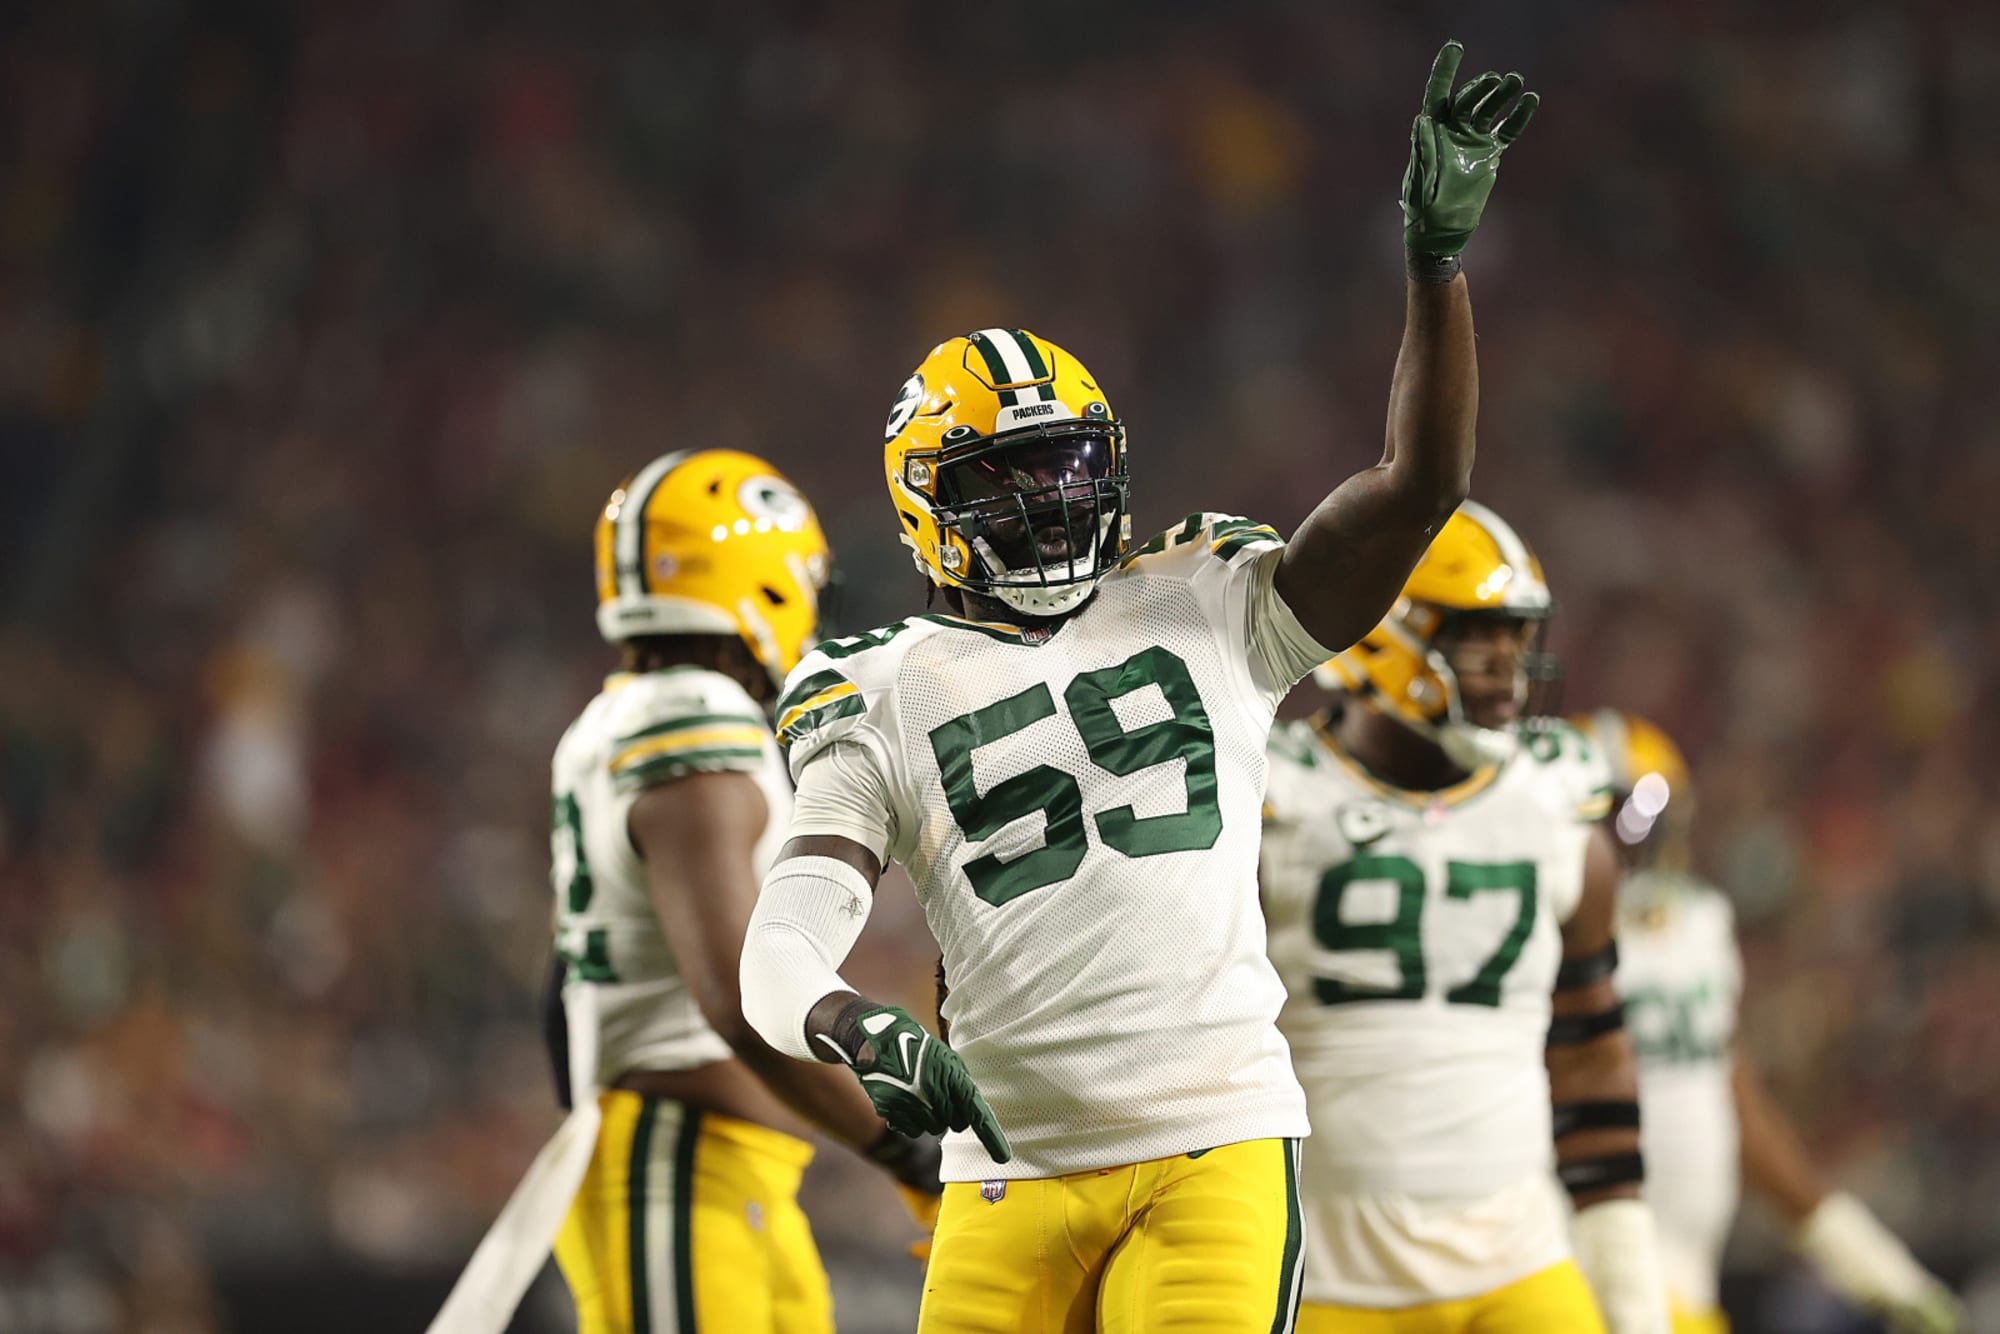 Green Bay Packers: Yosh Nijman's Potential Now on Full Display